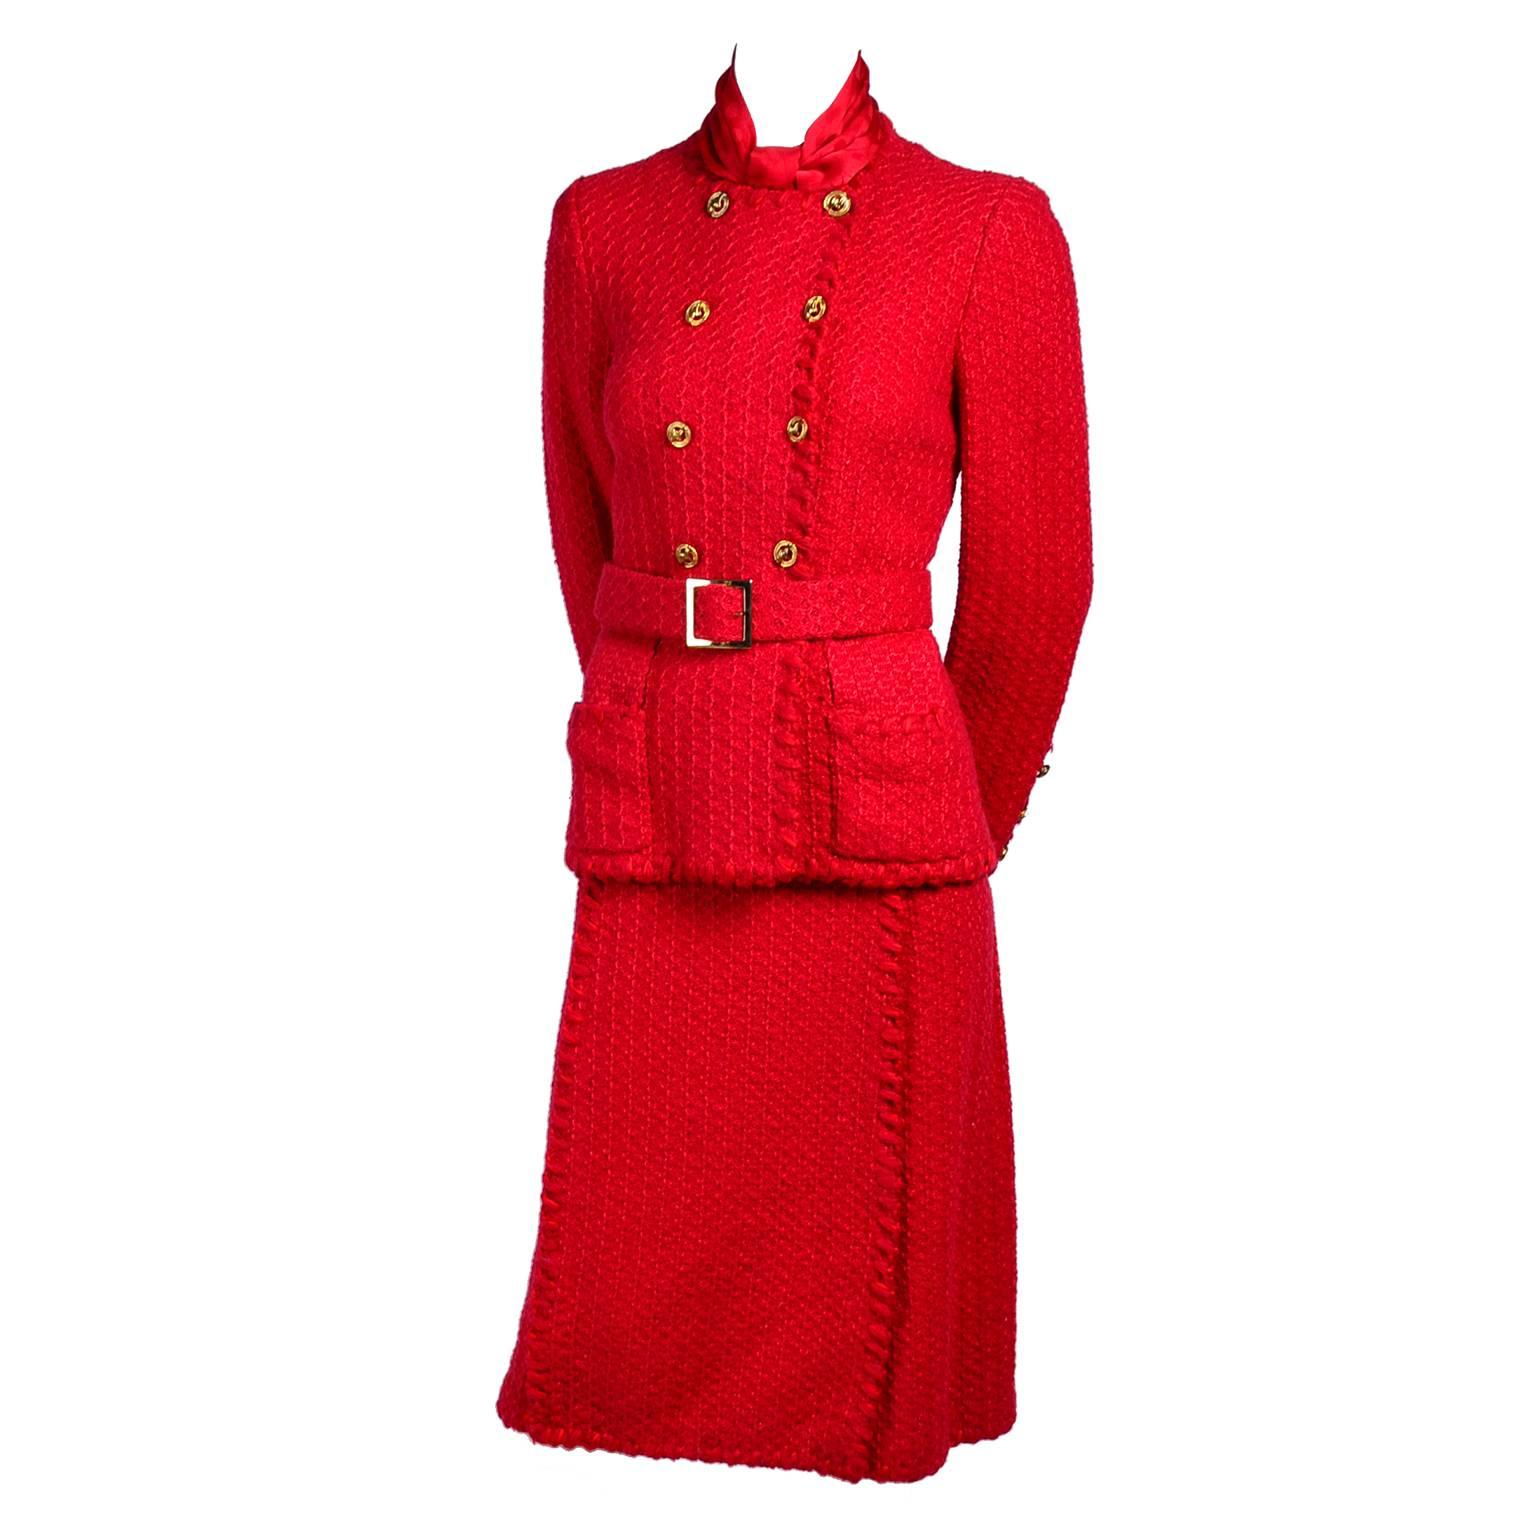 Vintage 1981 Adolfo Red Wool Skirt Suit Made Famous by First Lady Nancy Regan